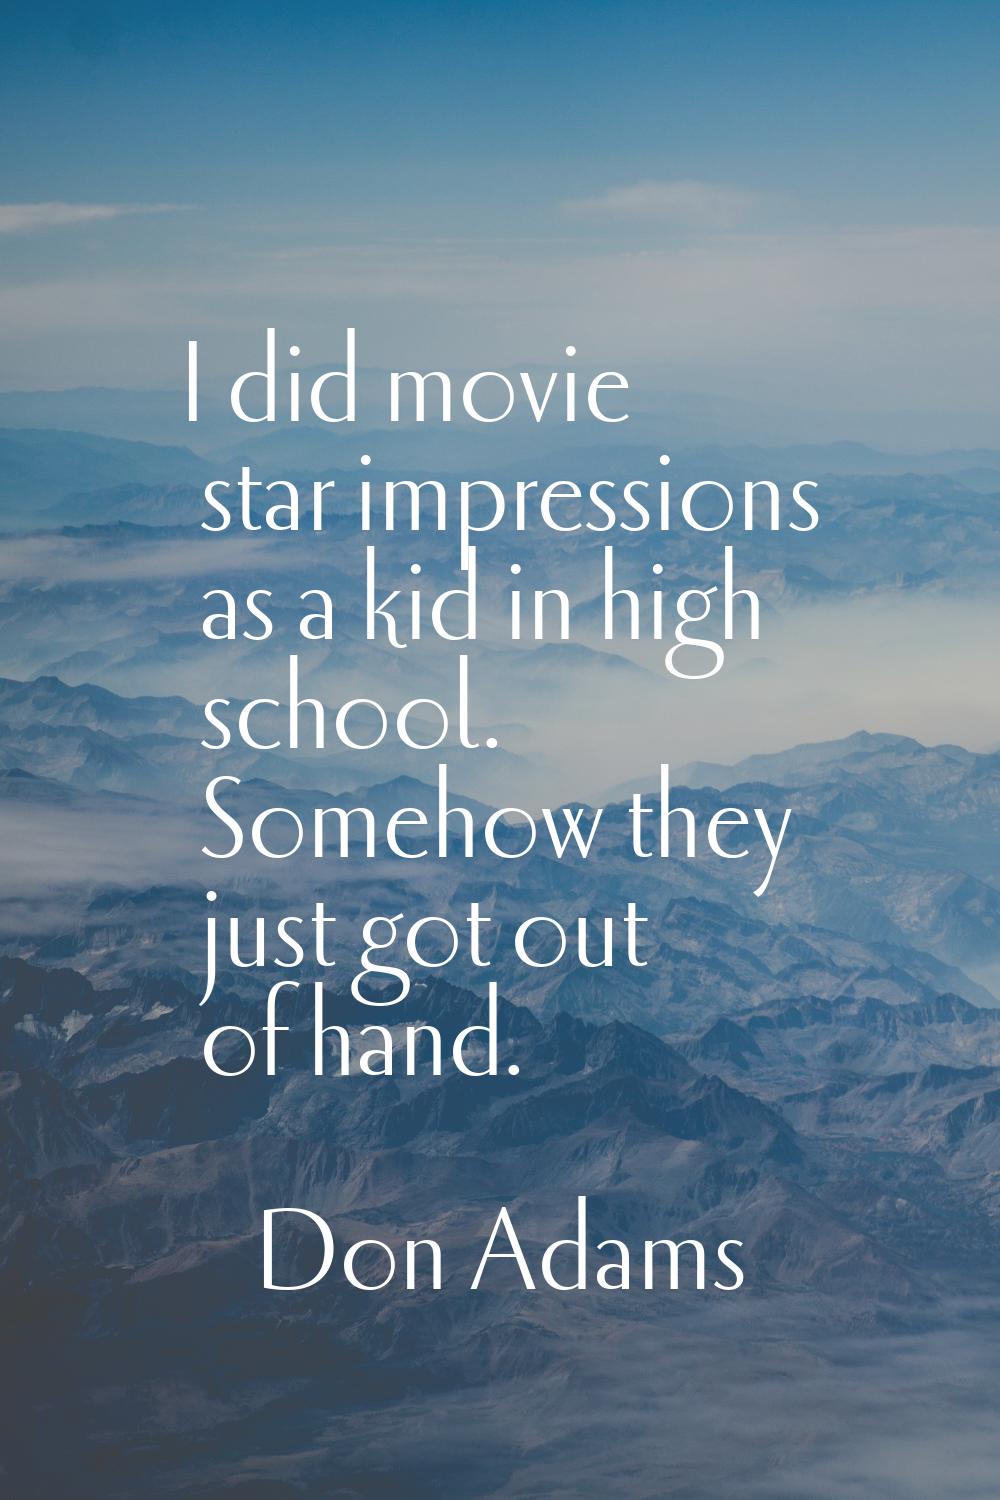 I did movie star impressions as a kid in high school. Somehow they just got out of hand.